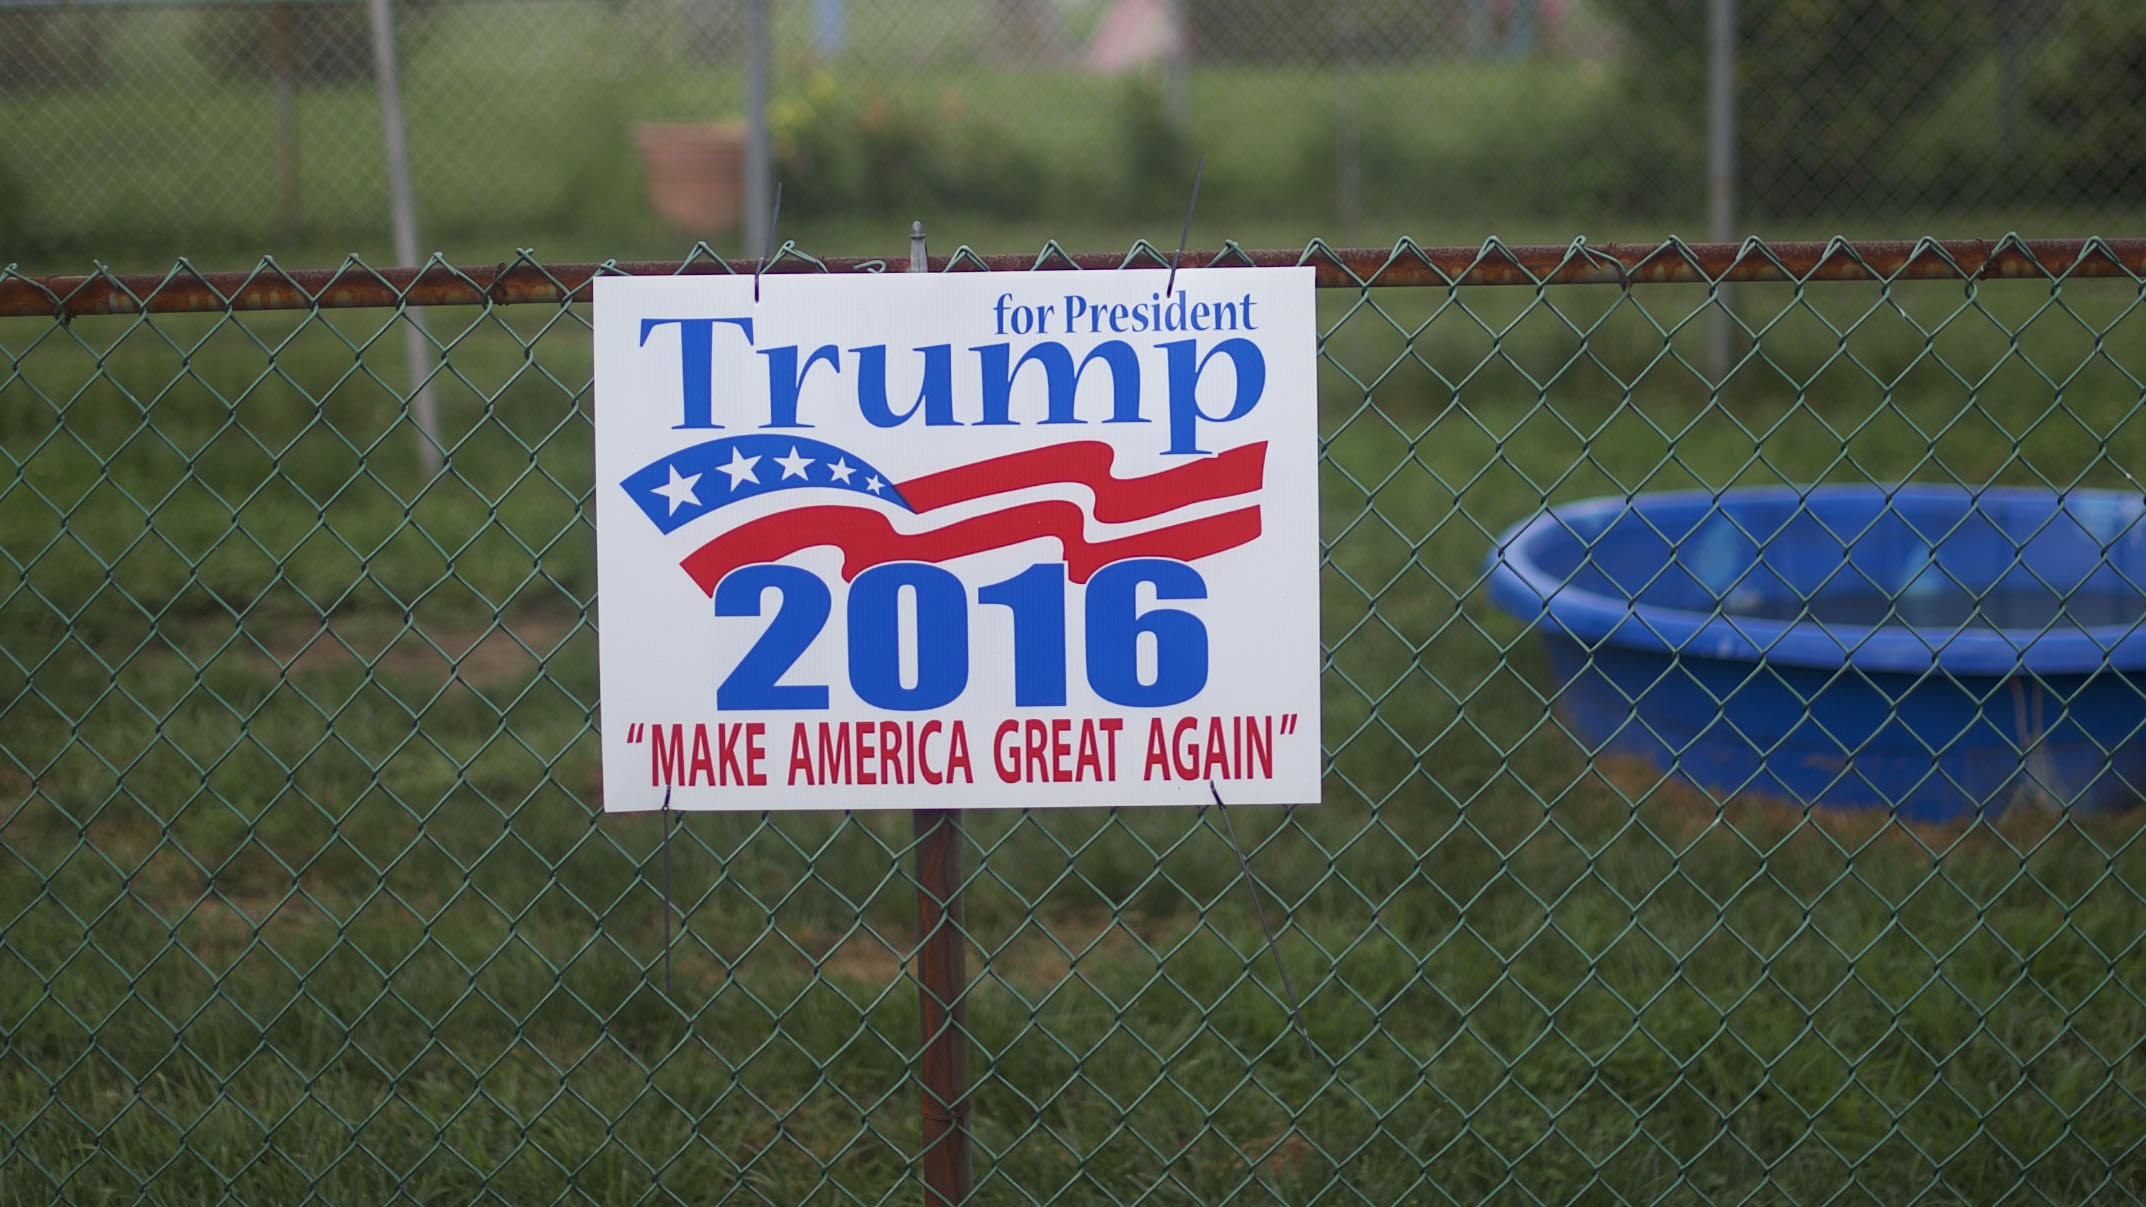 A Donald Trump sign is displayed in the backyard of a house on Aug. 14, 2016, in Schuylkill Haven, Pennsylvania.
